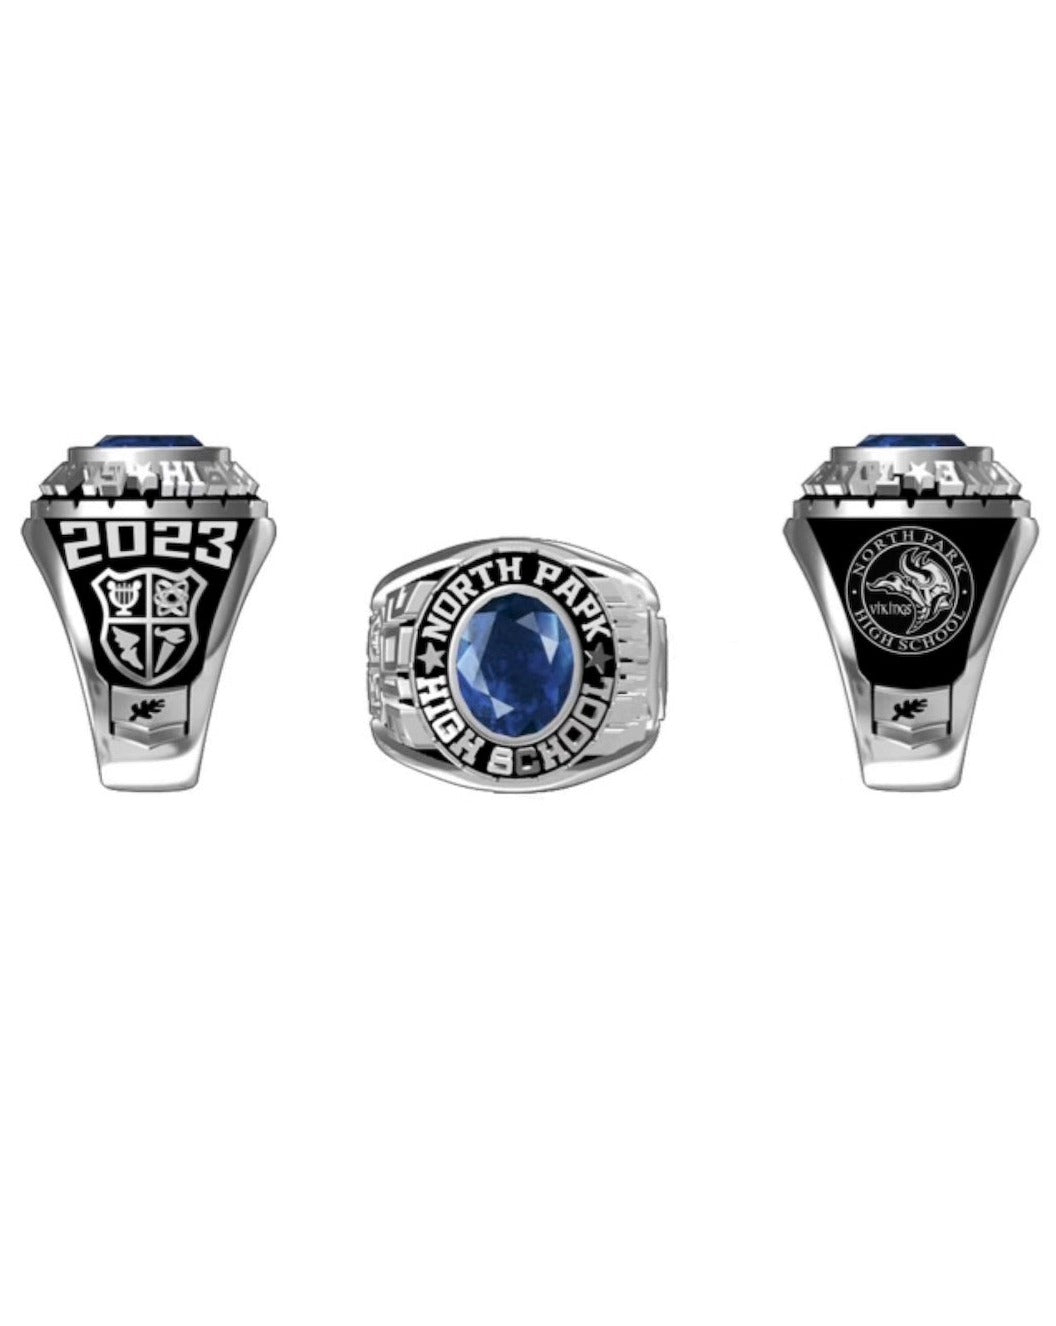 NORTH PARK CLASS RING